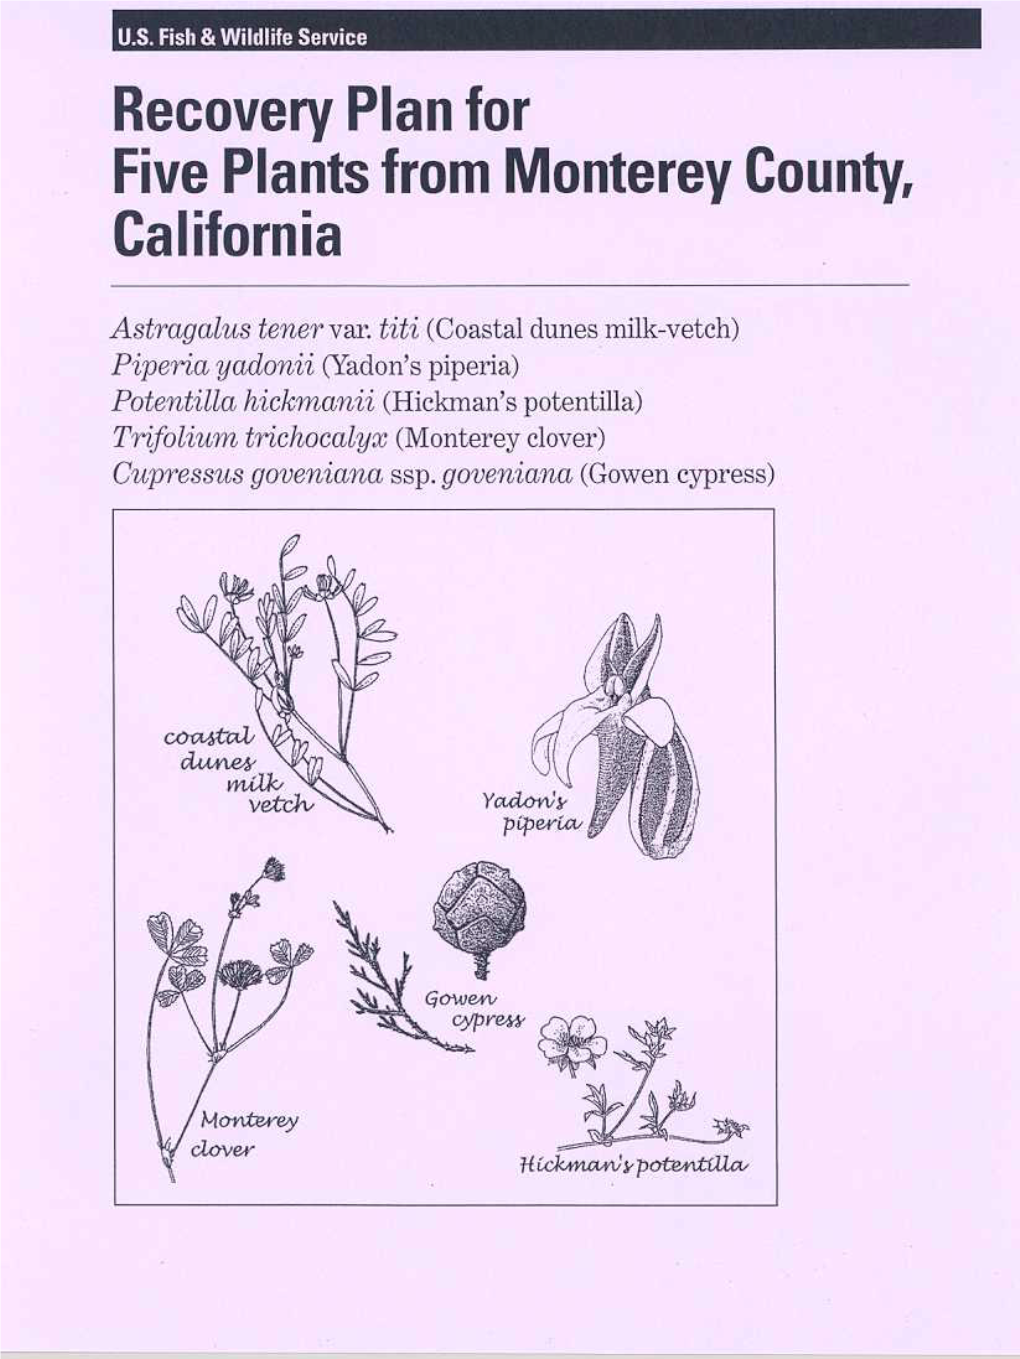 Recovery Plan for Five Plants from Monterey County, California